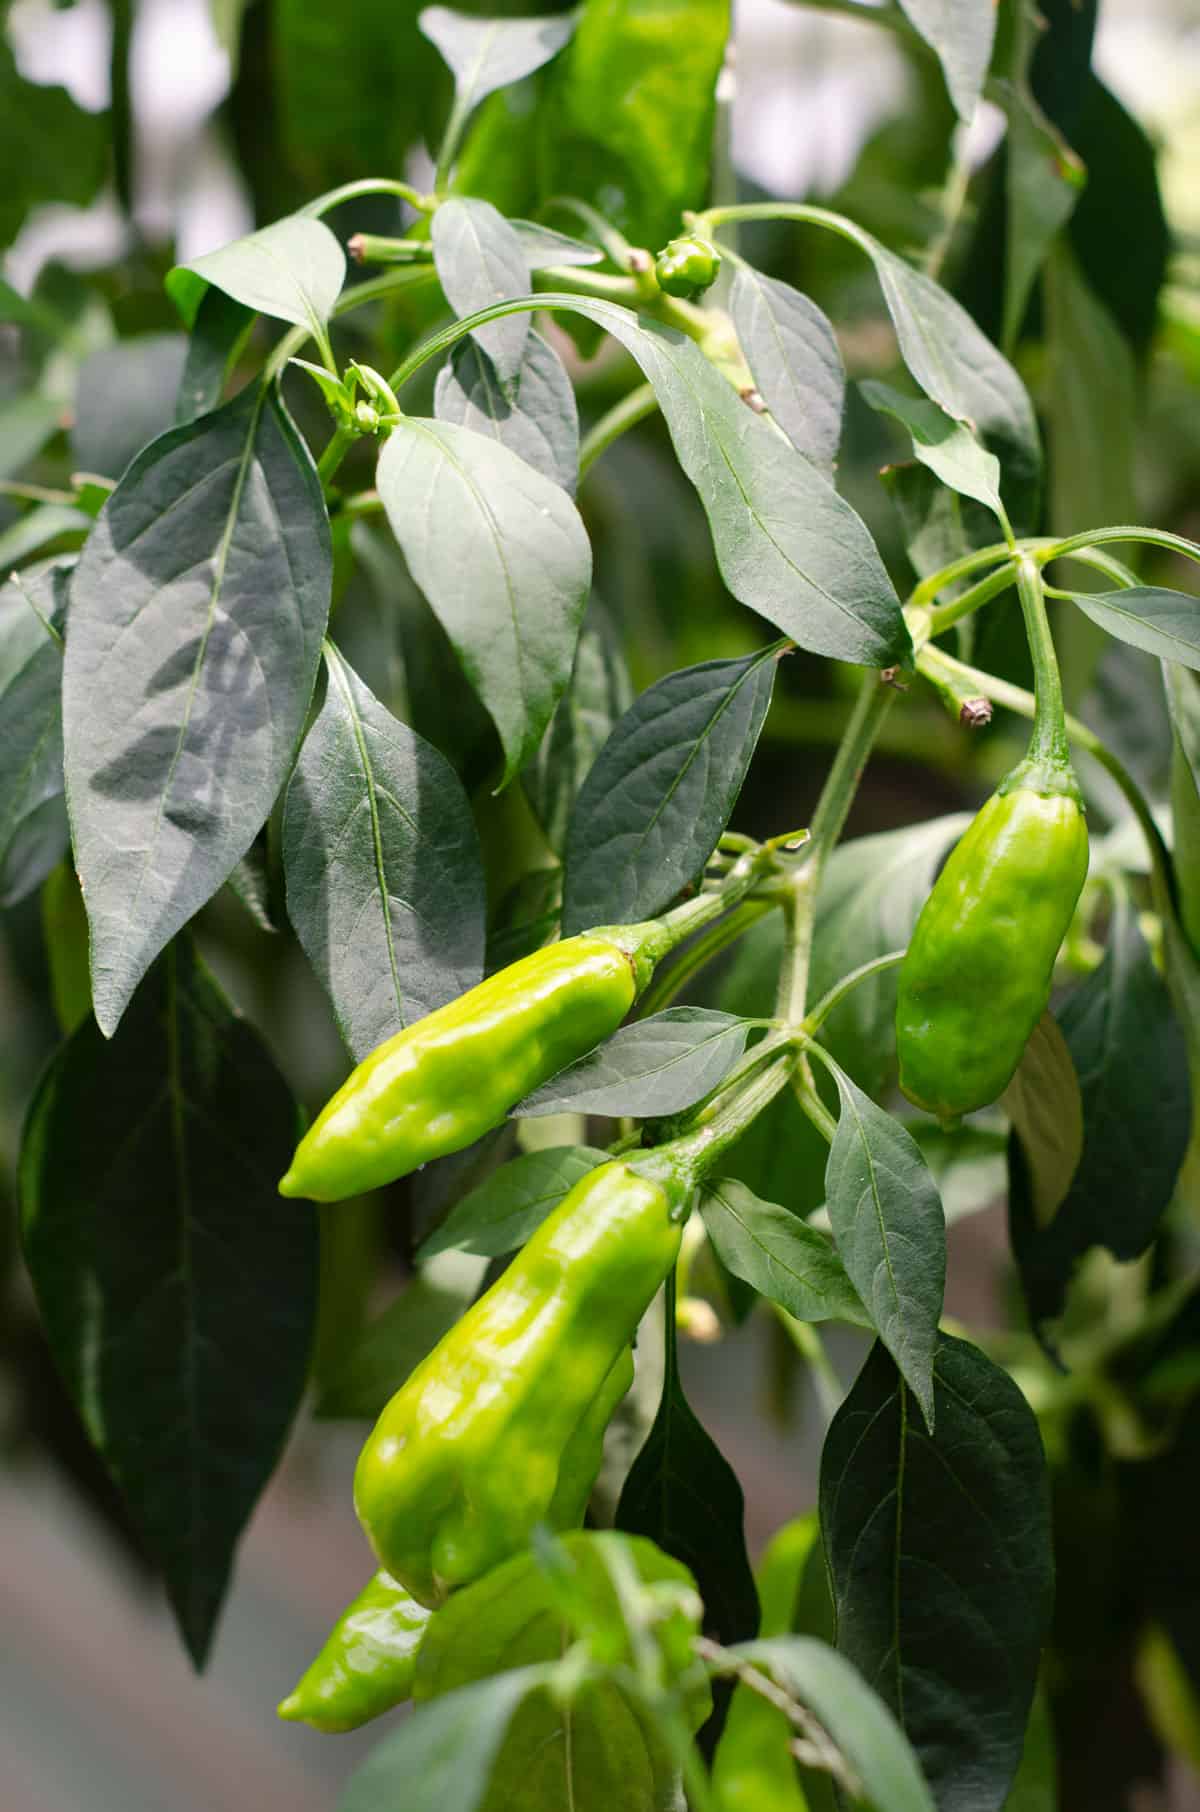 Close up of green shishito peppers growing on a branch